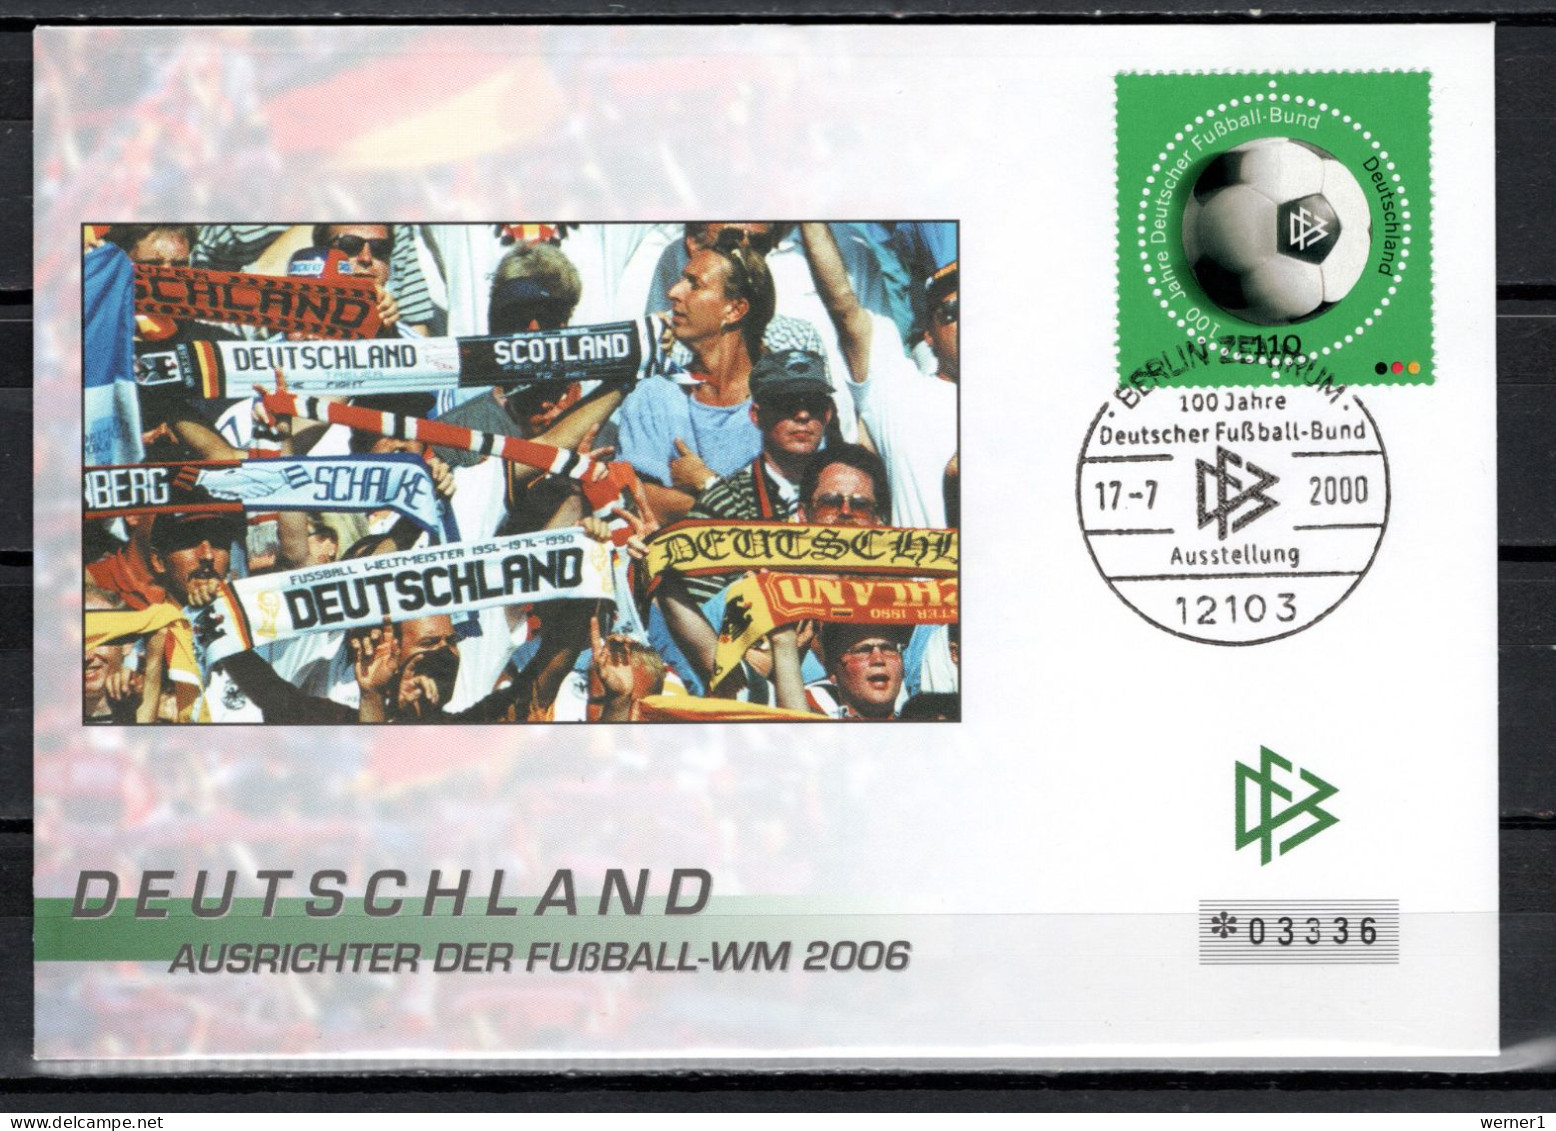 Germany 2000 Football Soccer World Cup Commemorative Cover - 2006 – Germany